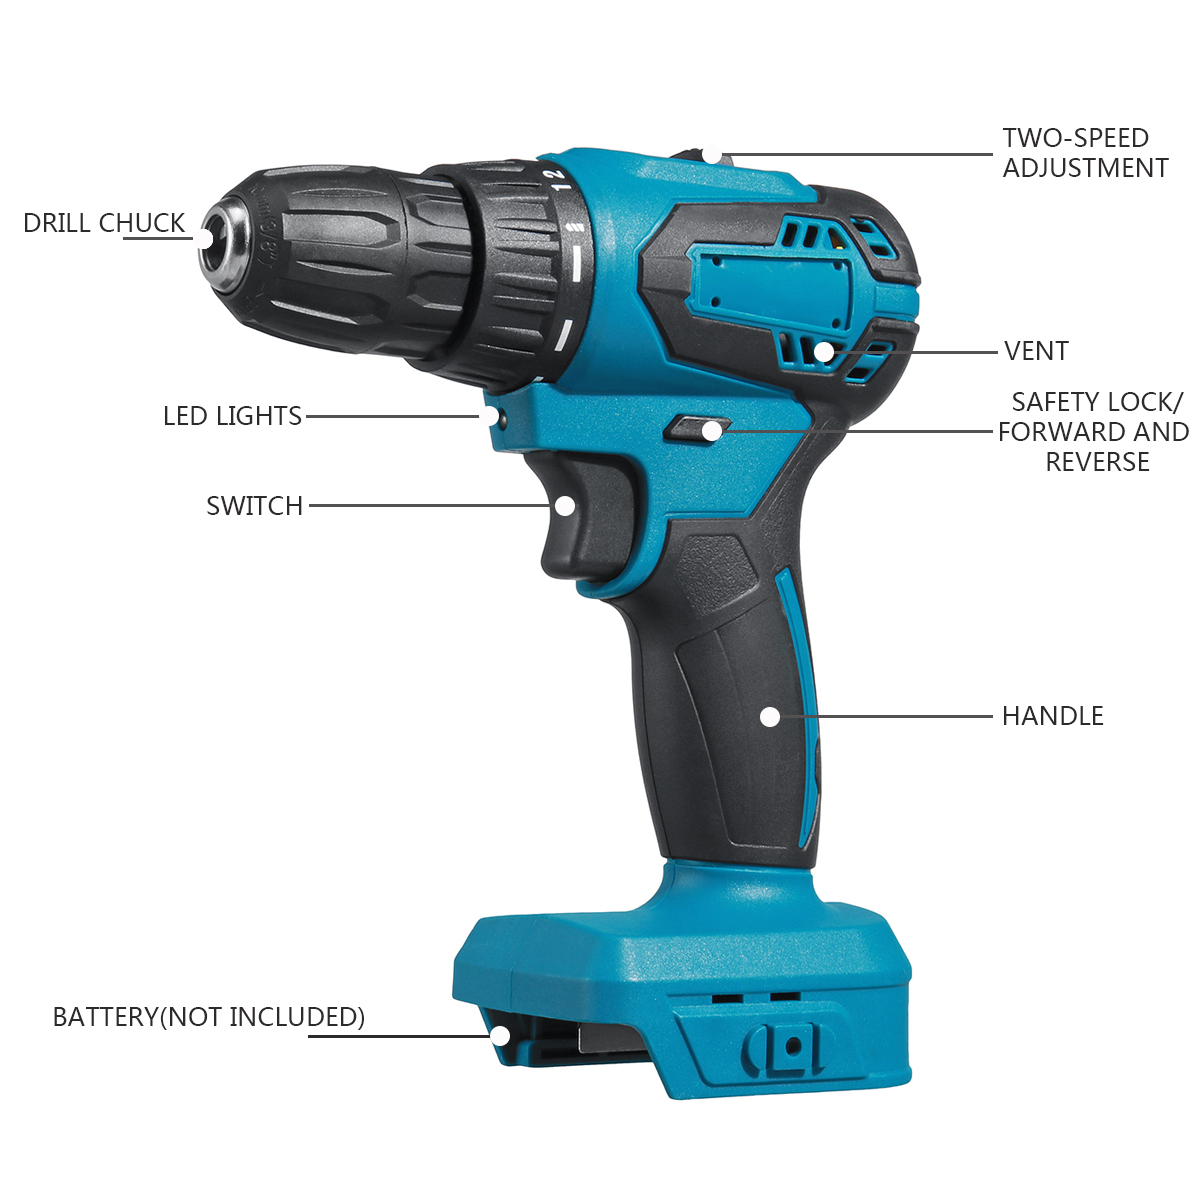 10mm-Rechargable-Electric-Drill-Screwdriver-1350RPM-2-Speed-Impact-Hand-Drill-Fit-Makita-Battery-1882944-11